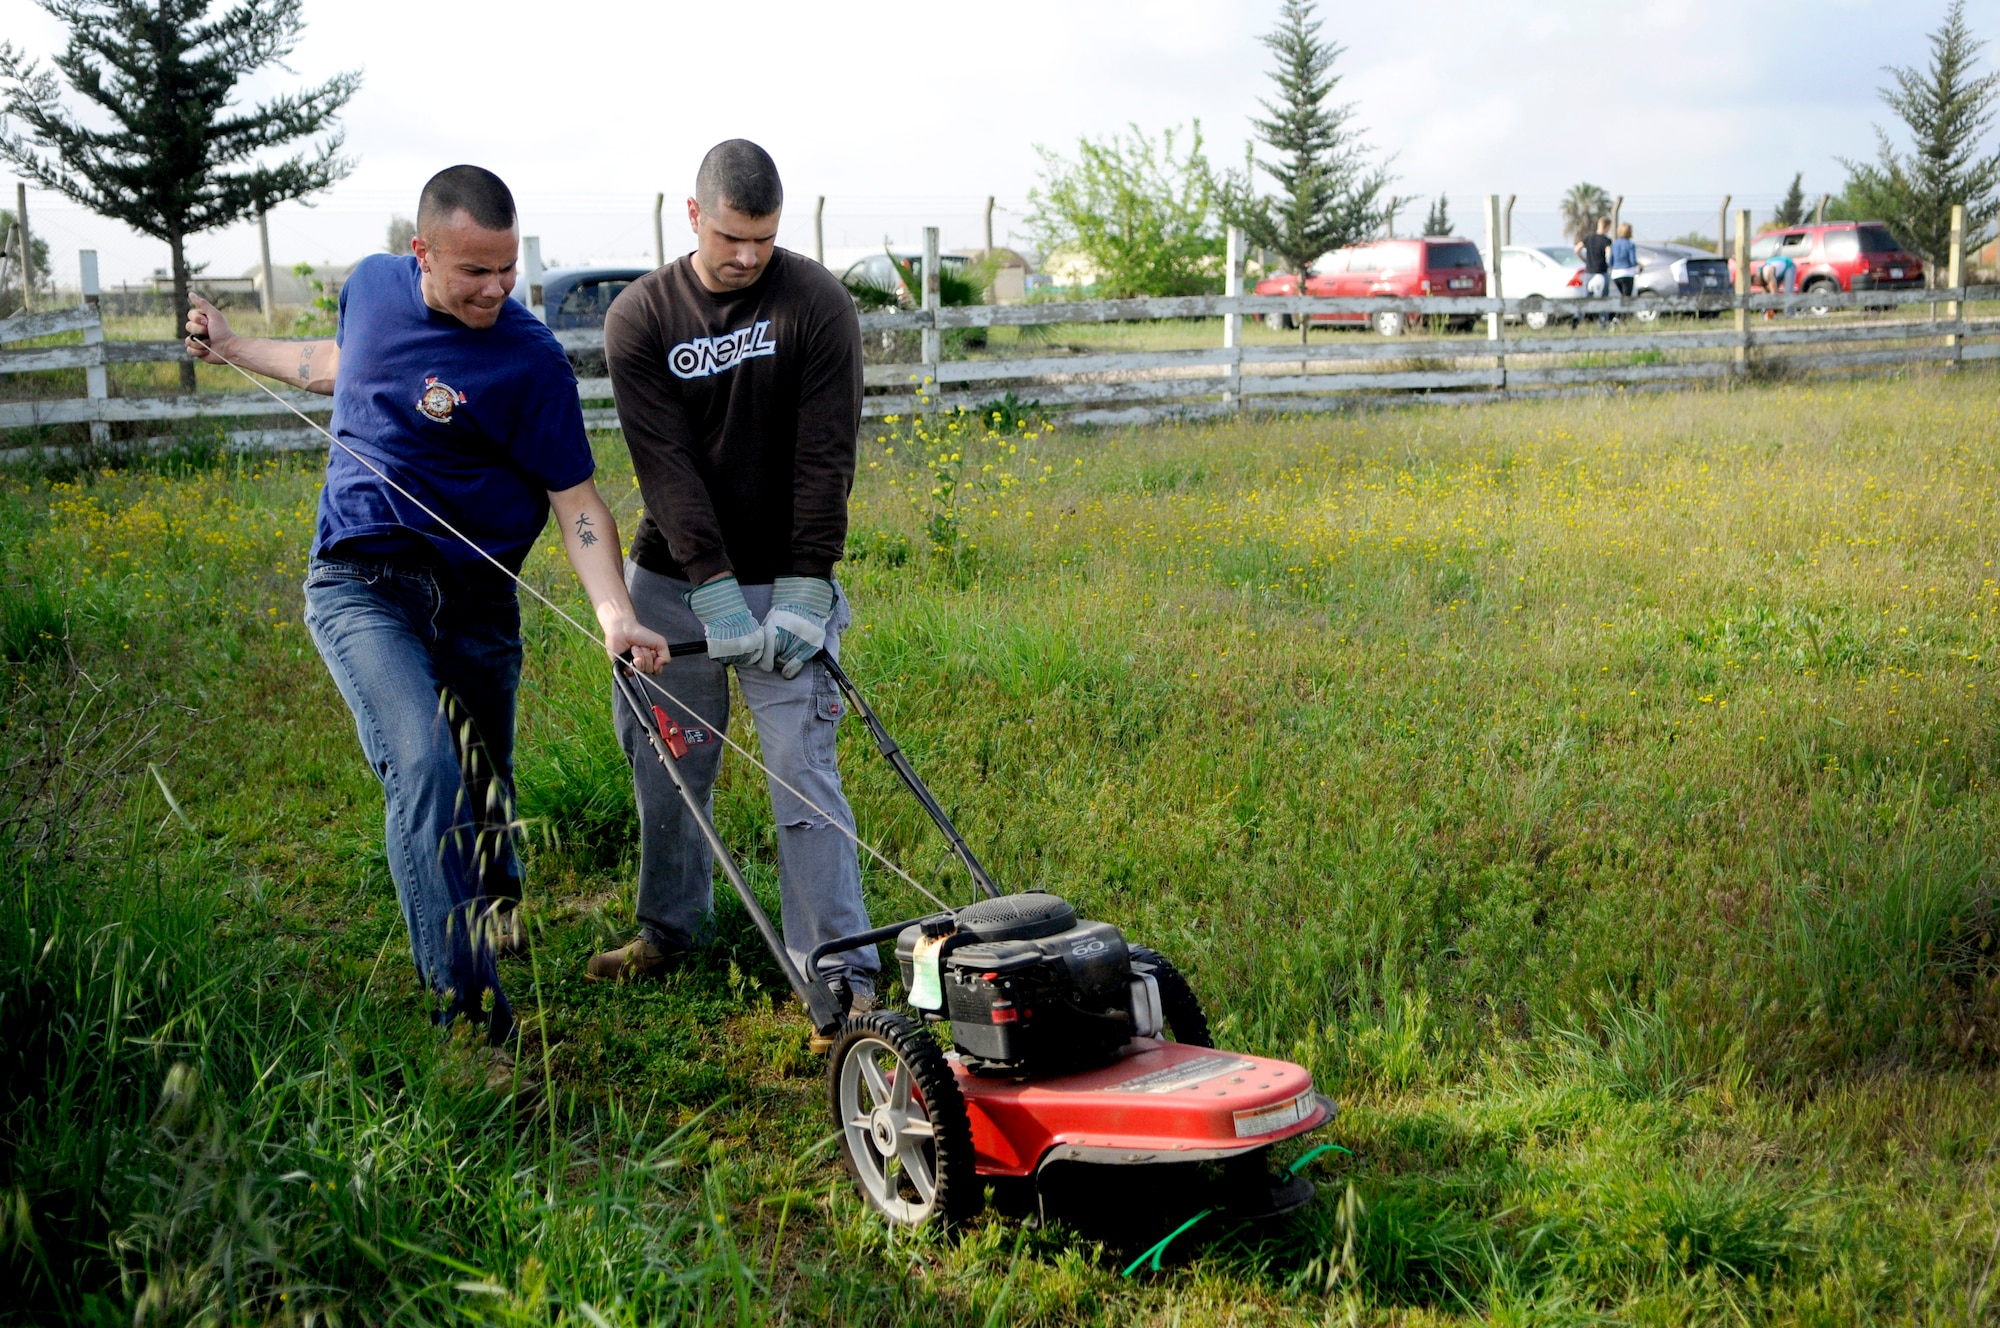 Staff Sgt. Kitsana Dounglomchan, 39th Force Support Squadron, left, and Staff Sgt. Paul Melicia, 39th Security Forces Squadron, try to start a mower at the base dog park April 21, 2012, at Incirlik Air Base, Turkey. Twelve volunteers spent five hours gathering trash and debris, mending fences, and mowing to provide a place for the base's furry residents to play. (U.S. Air Force photo by Staff Sgt. Kali L. Gradishar/Released)